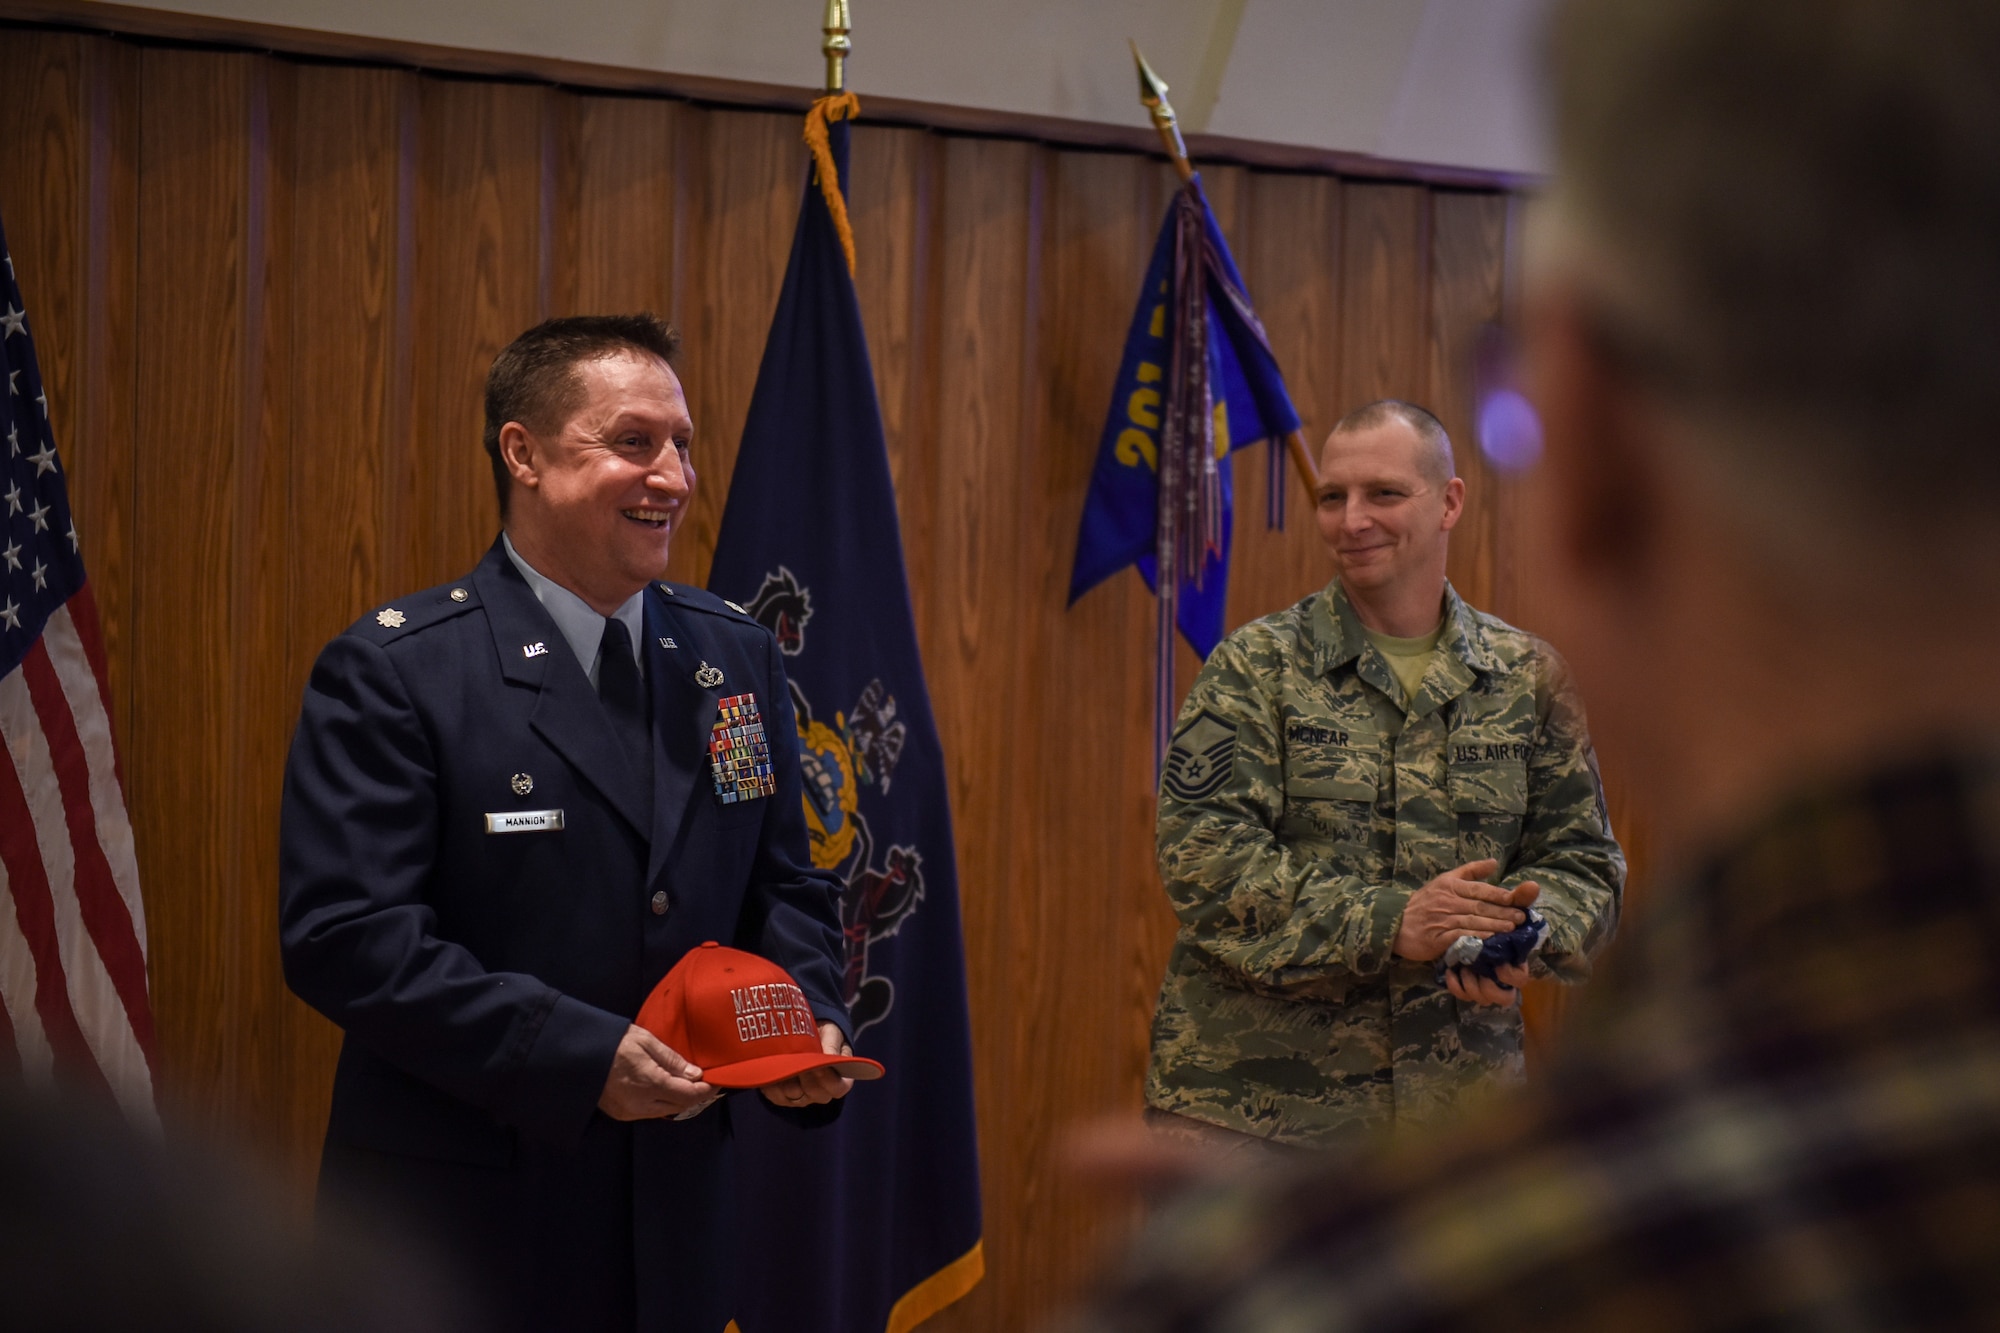 Lt. Col. Eric Mannion reacts to a gift from Airmen during the 201st RED HORSE assumption of command ceremony.